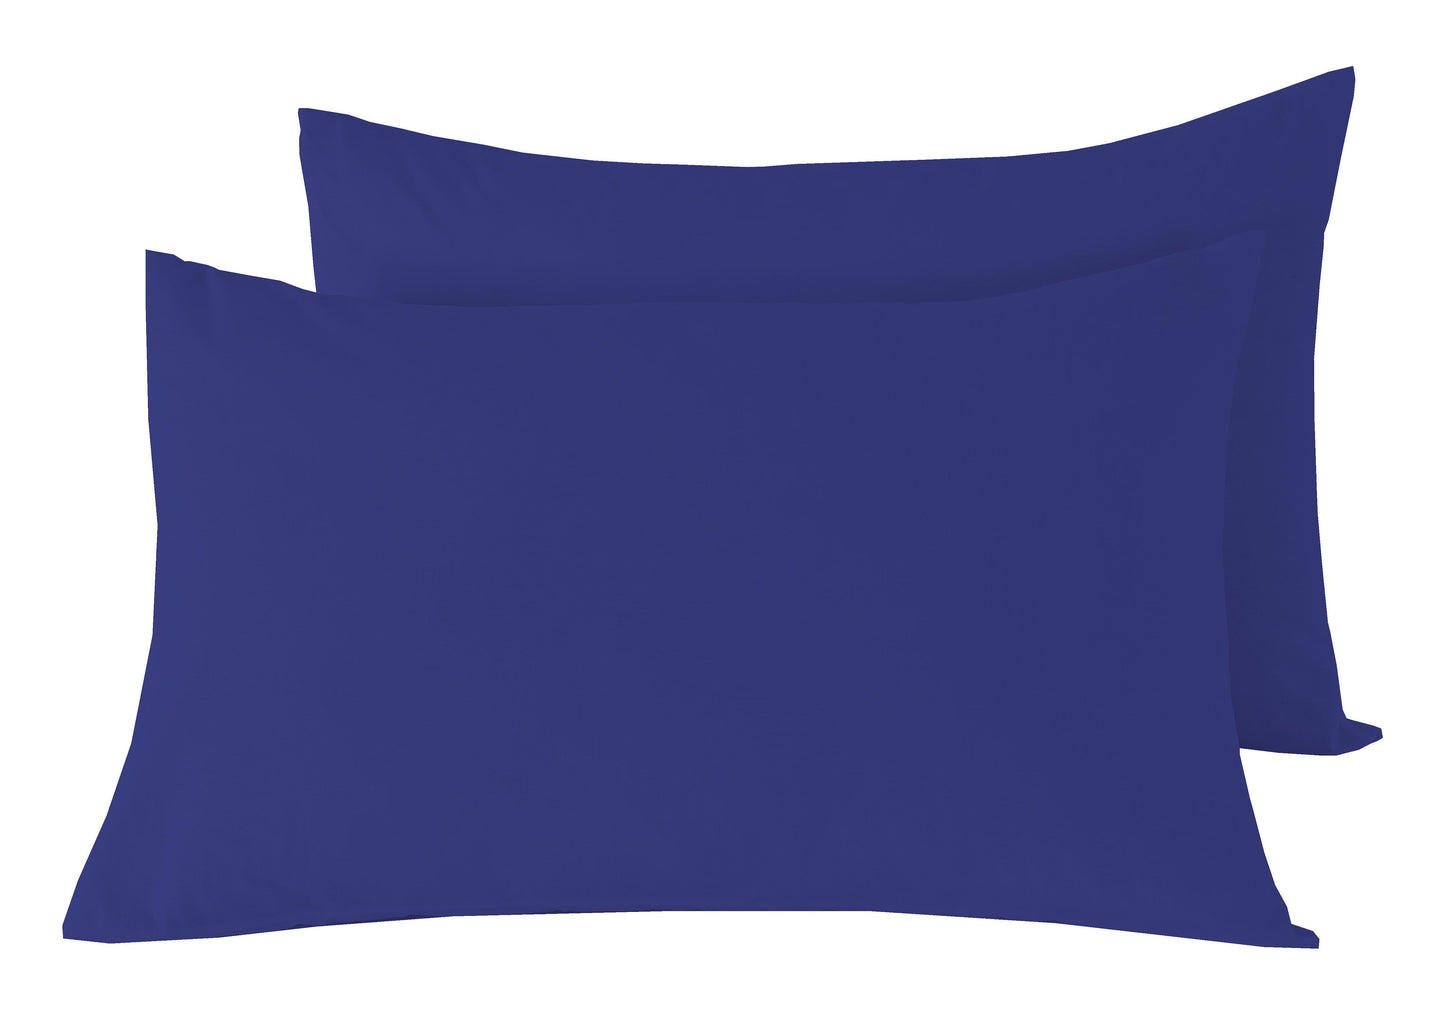 Basics Fitted Sheet PILLOWCASES / BLUE OLIVIA ROCCO basics Fitted Sheet